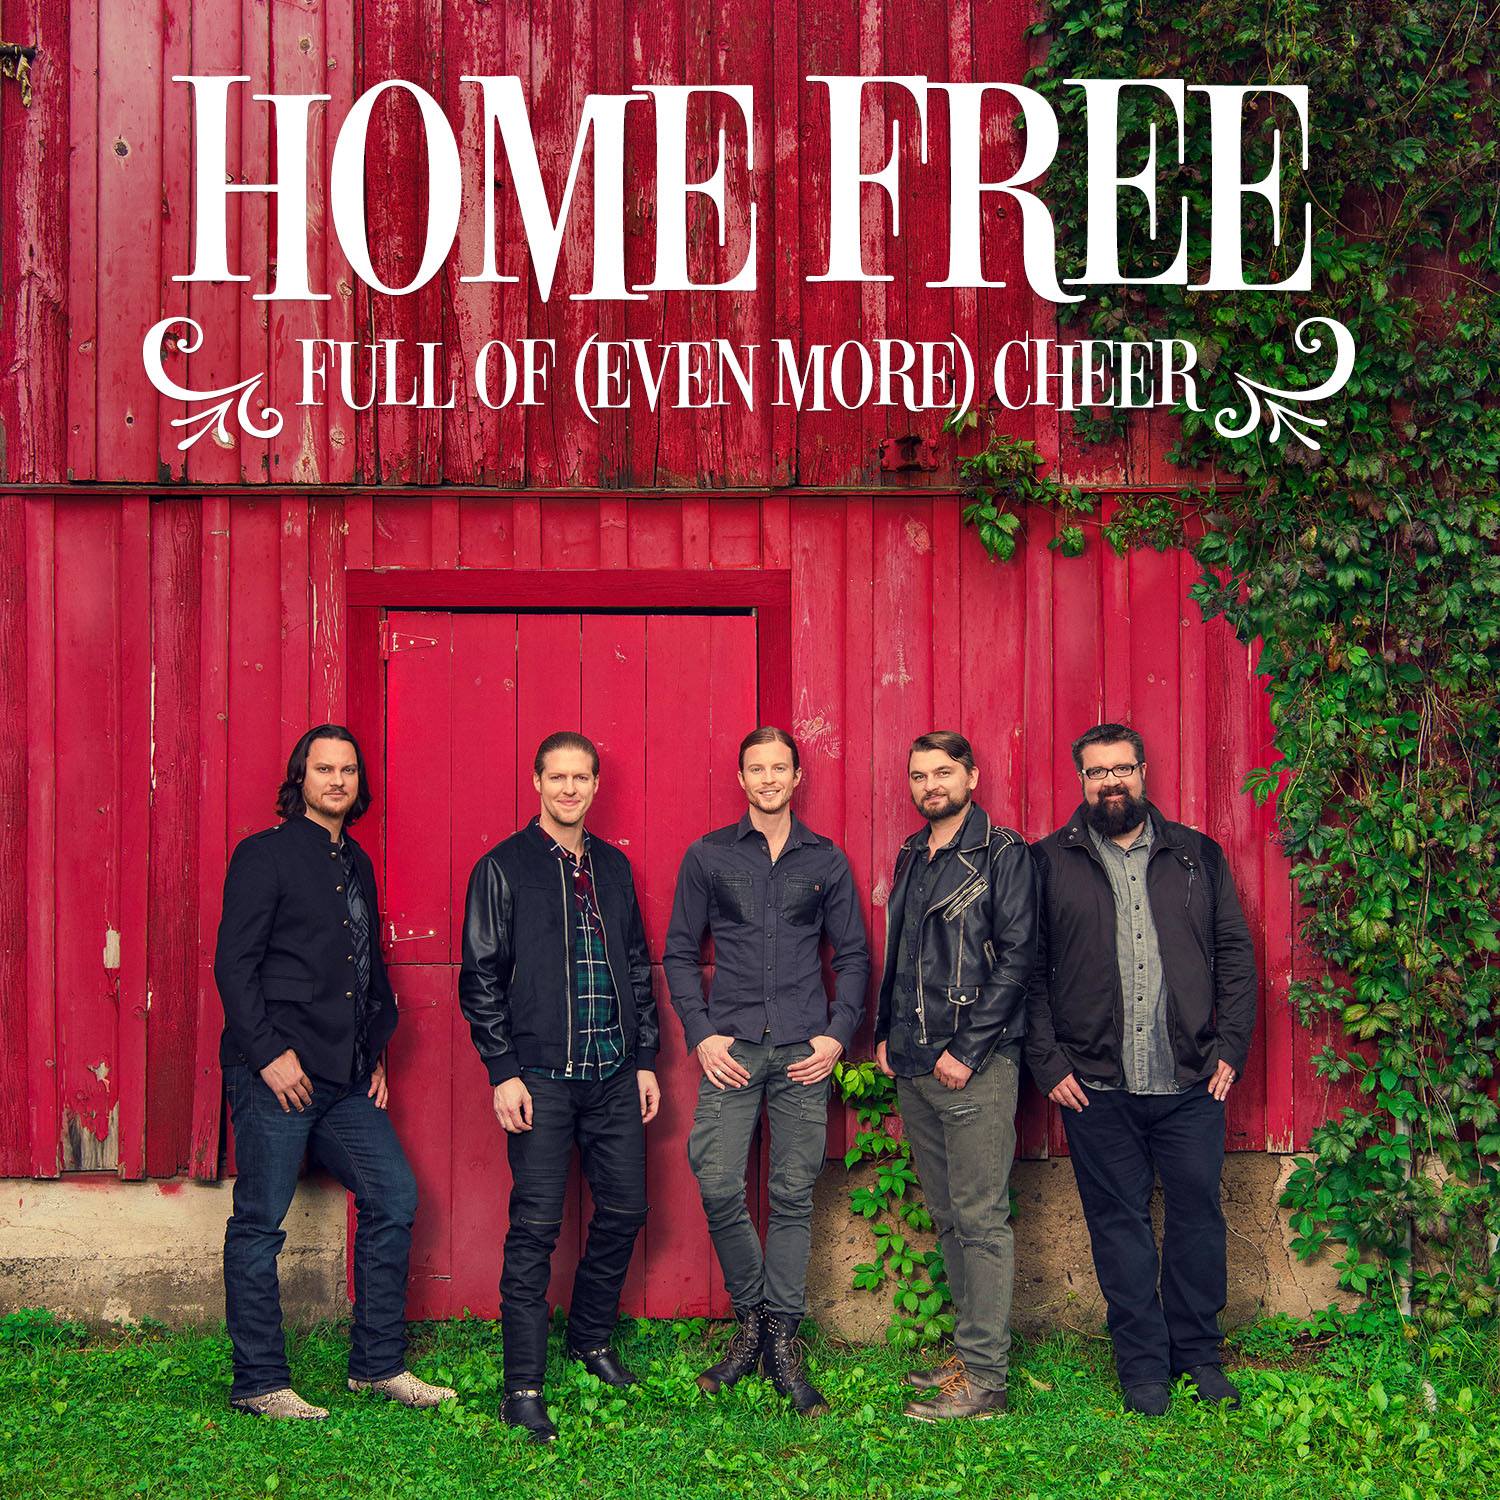 Cover art for the Home Free Christmas album "Full of (Even More) Cheer"